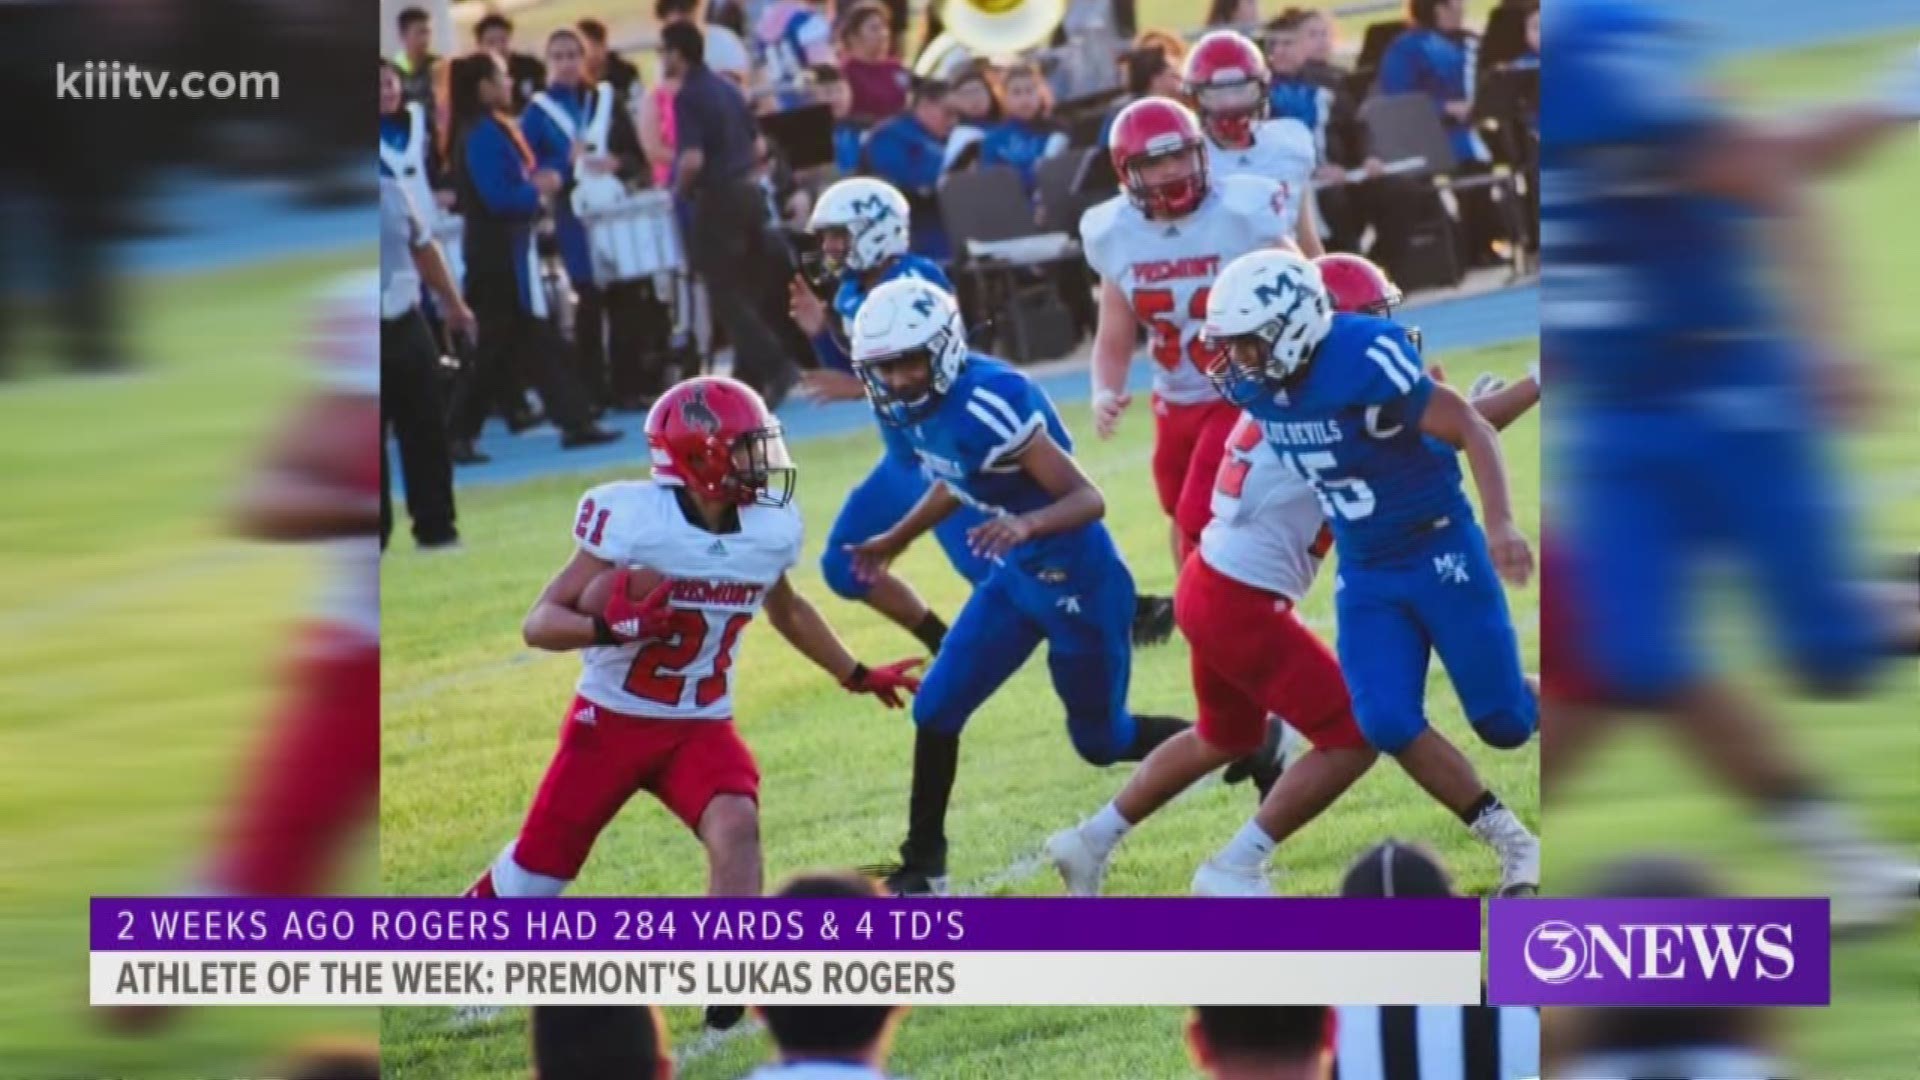 Premont's Lukas Rogers is our 3News Athlete of the Week!